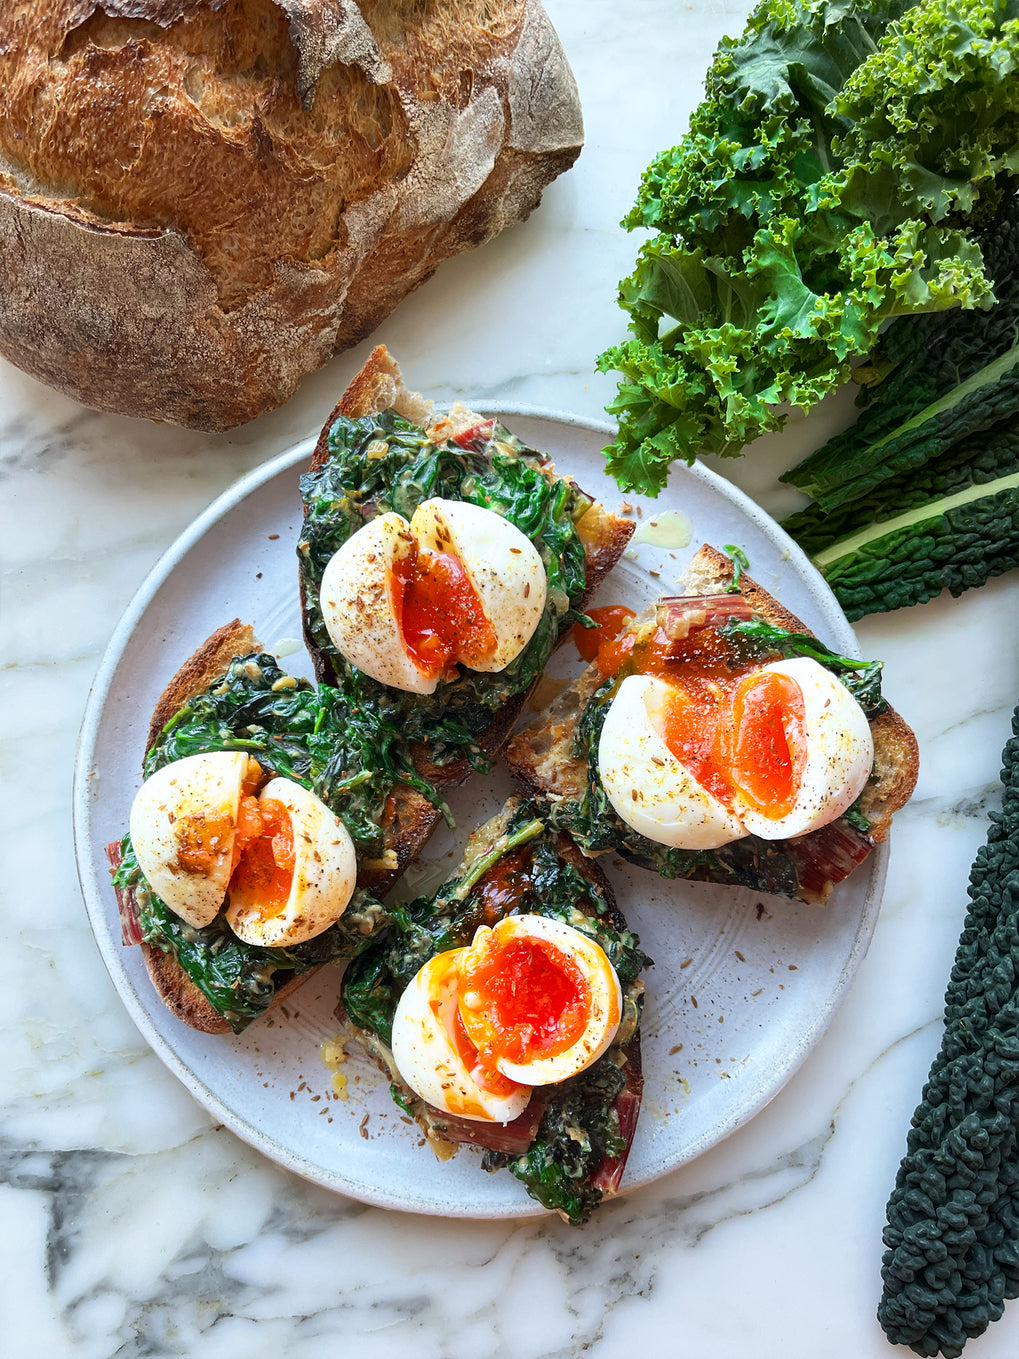 Coconut greens with scotch bonnet and jammy eggs